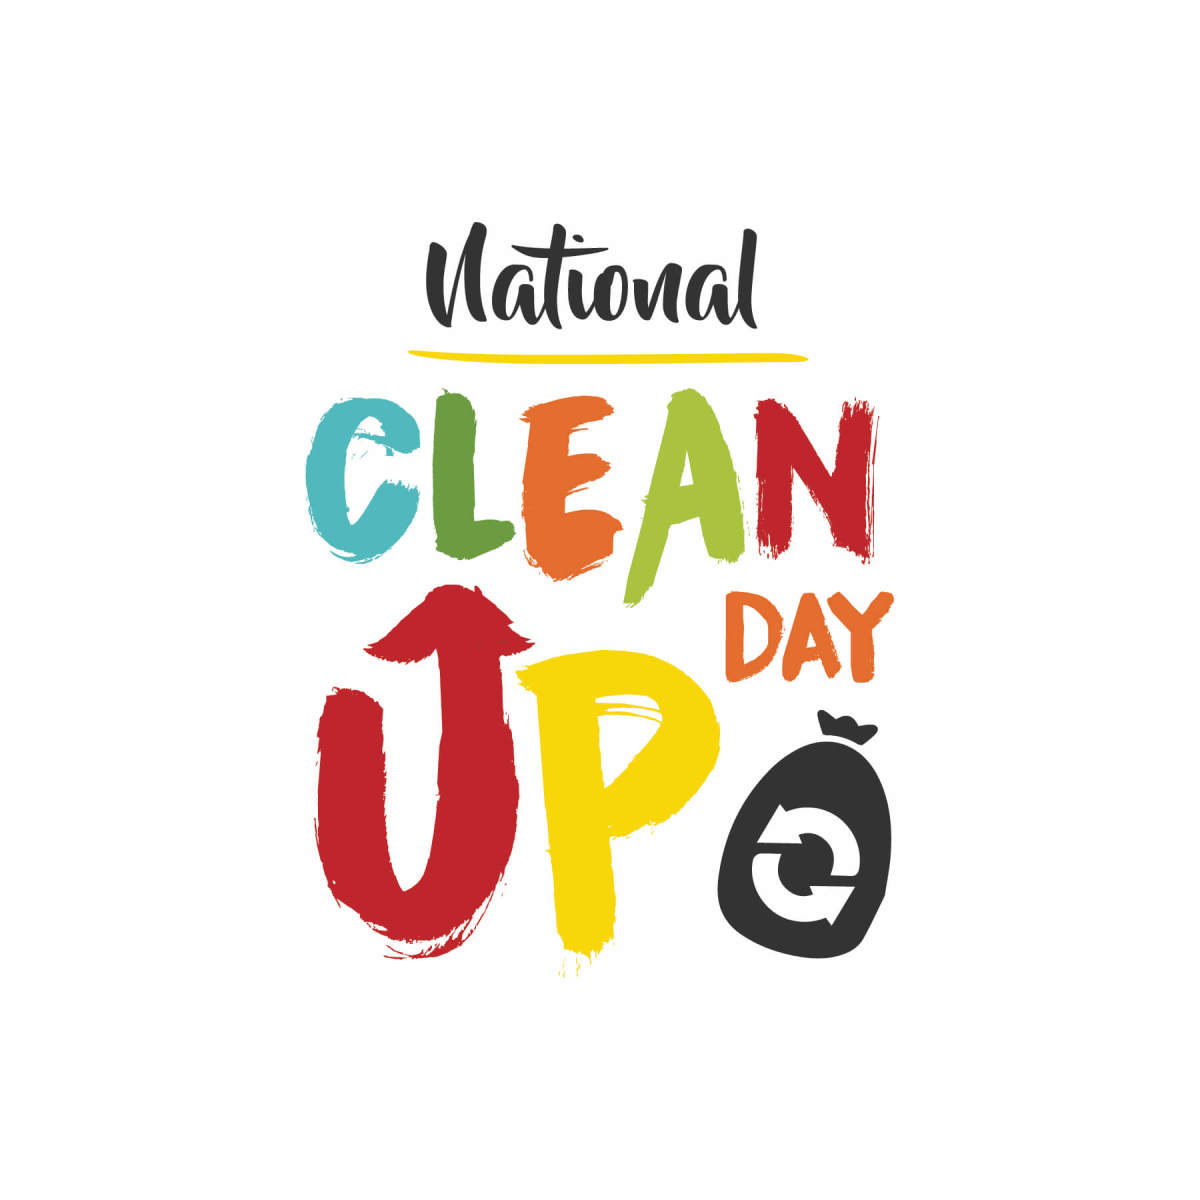 NEW DAY PROCLAMATION NATIONAL CLEANUP DAY Third Saturday in